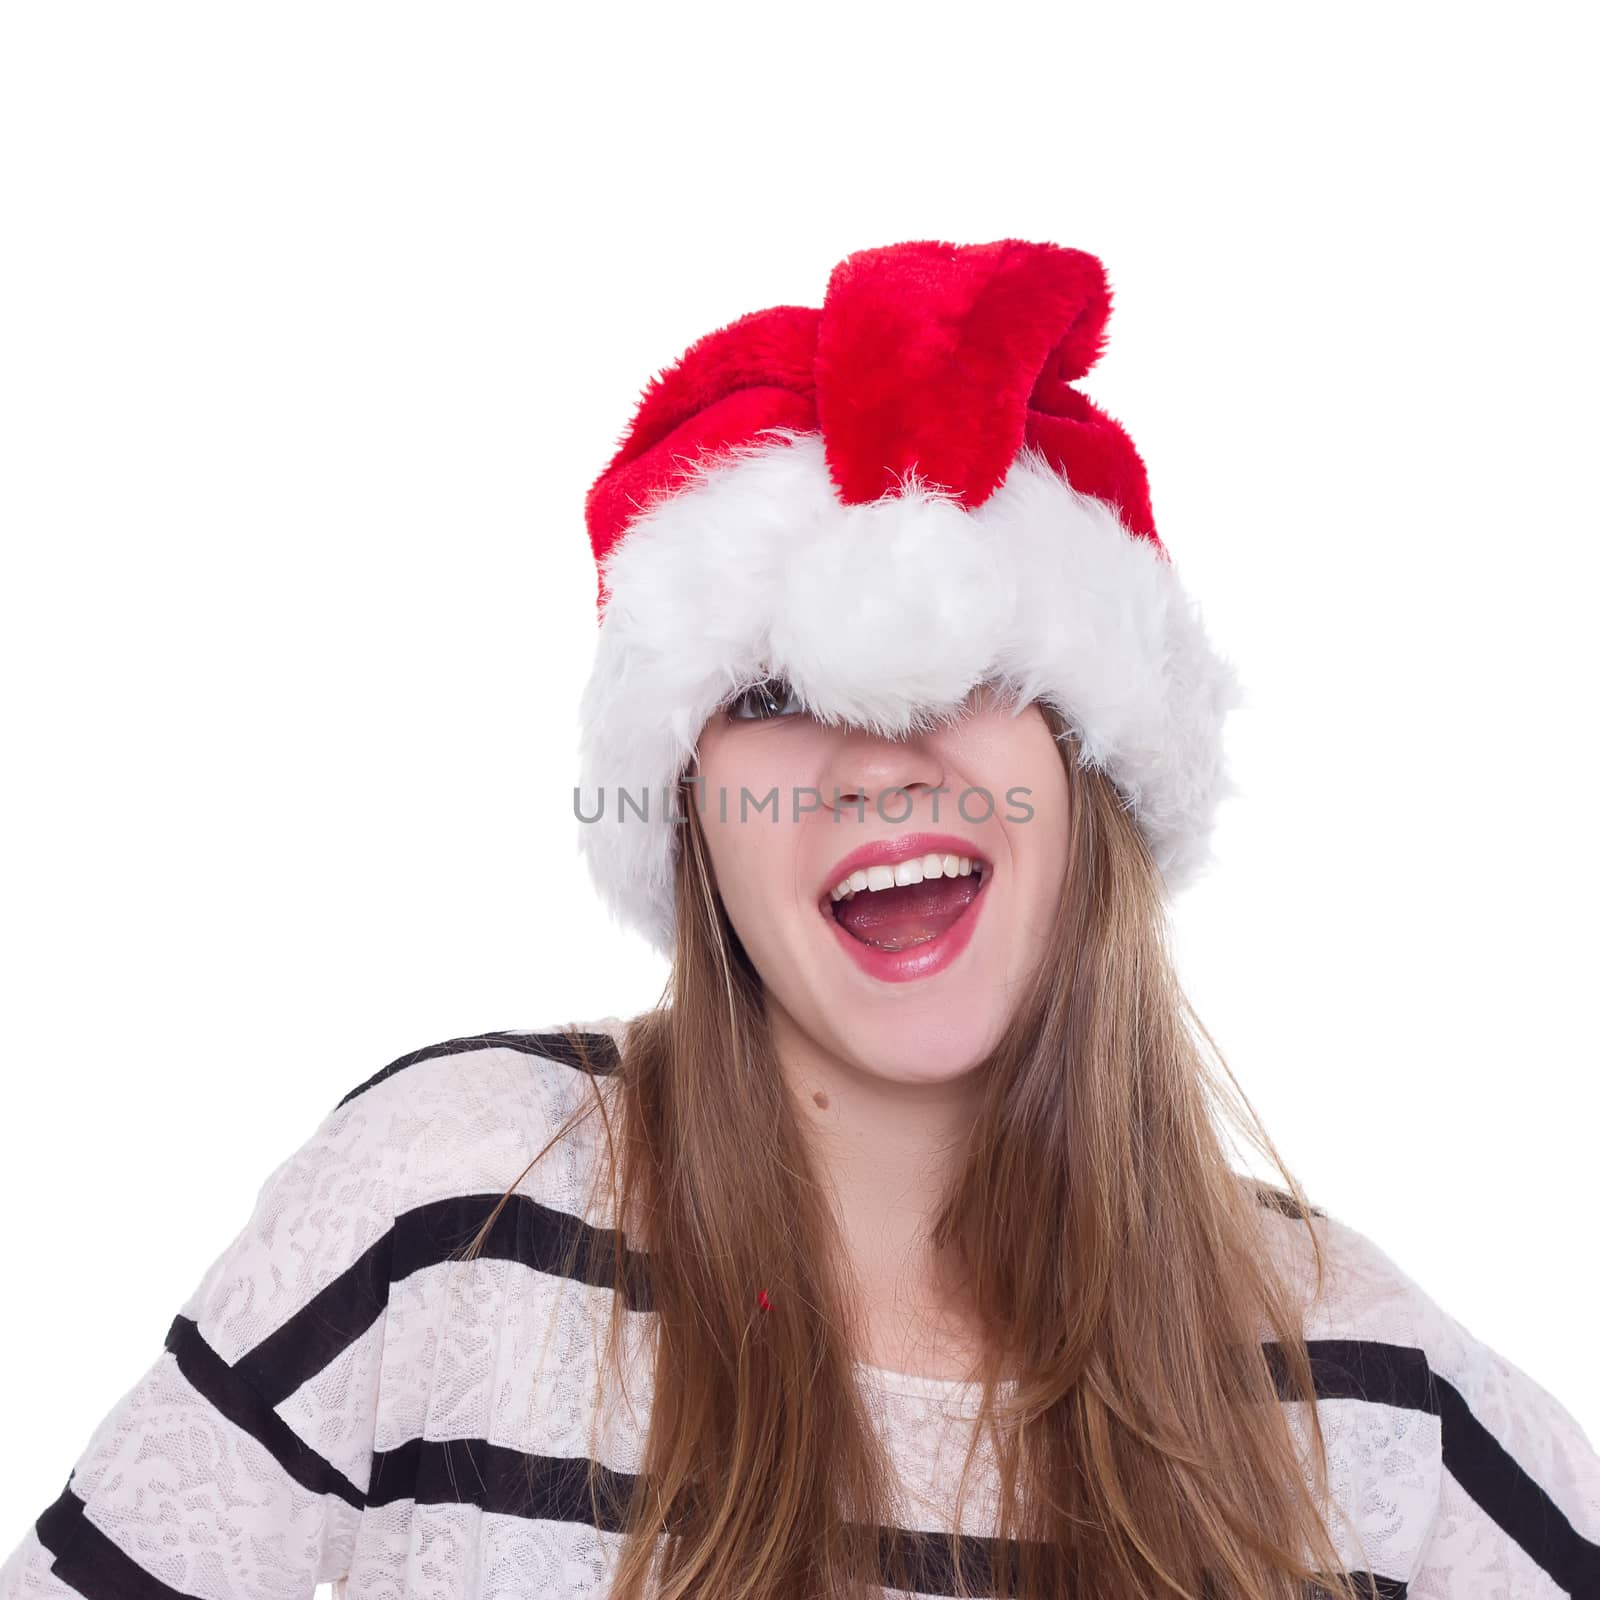 Expressive emotional girl in a Christmas hat on a white background. isolate